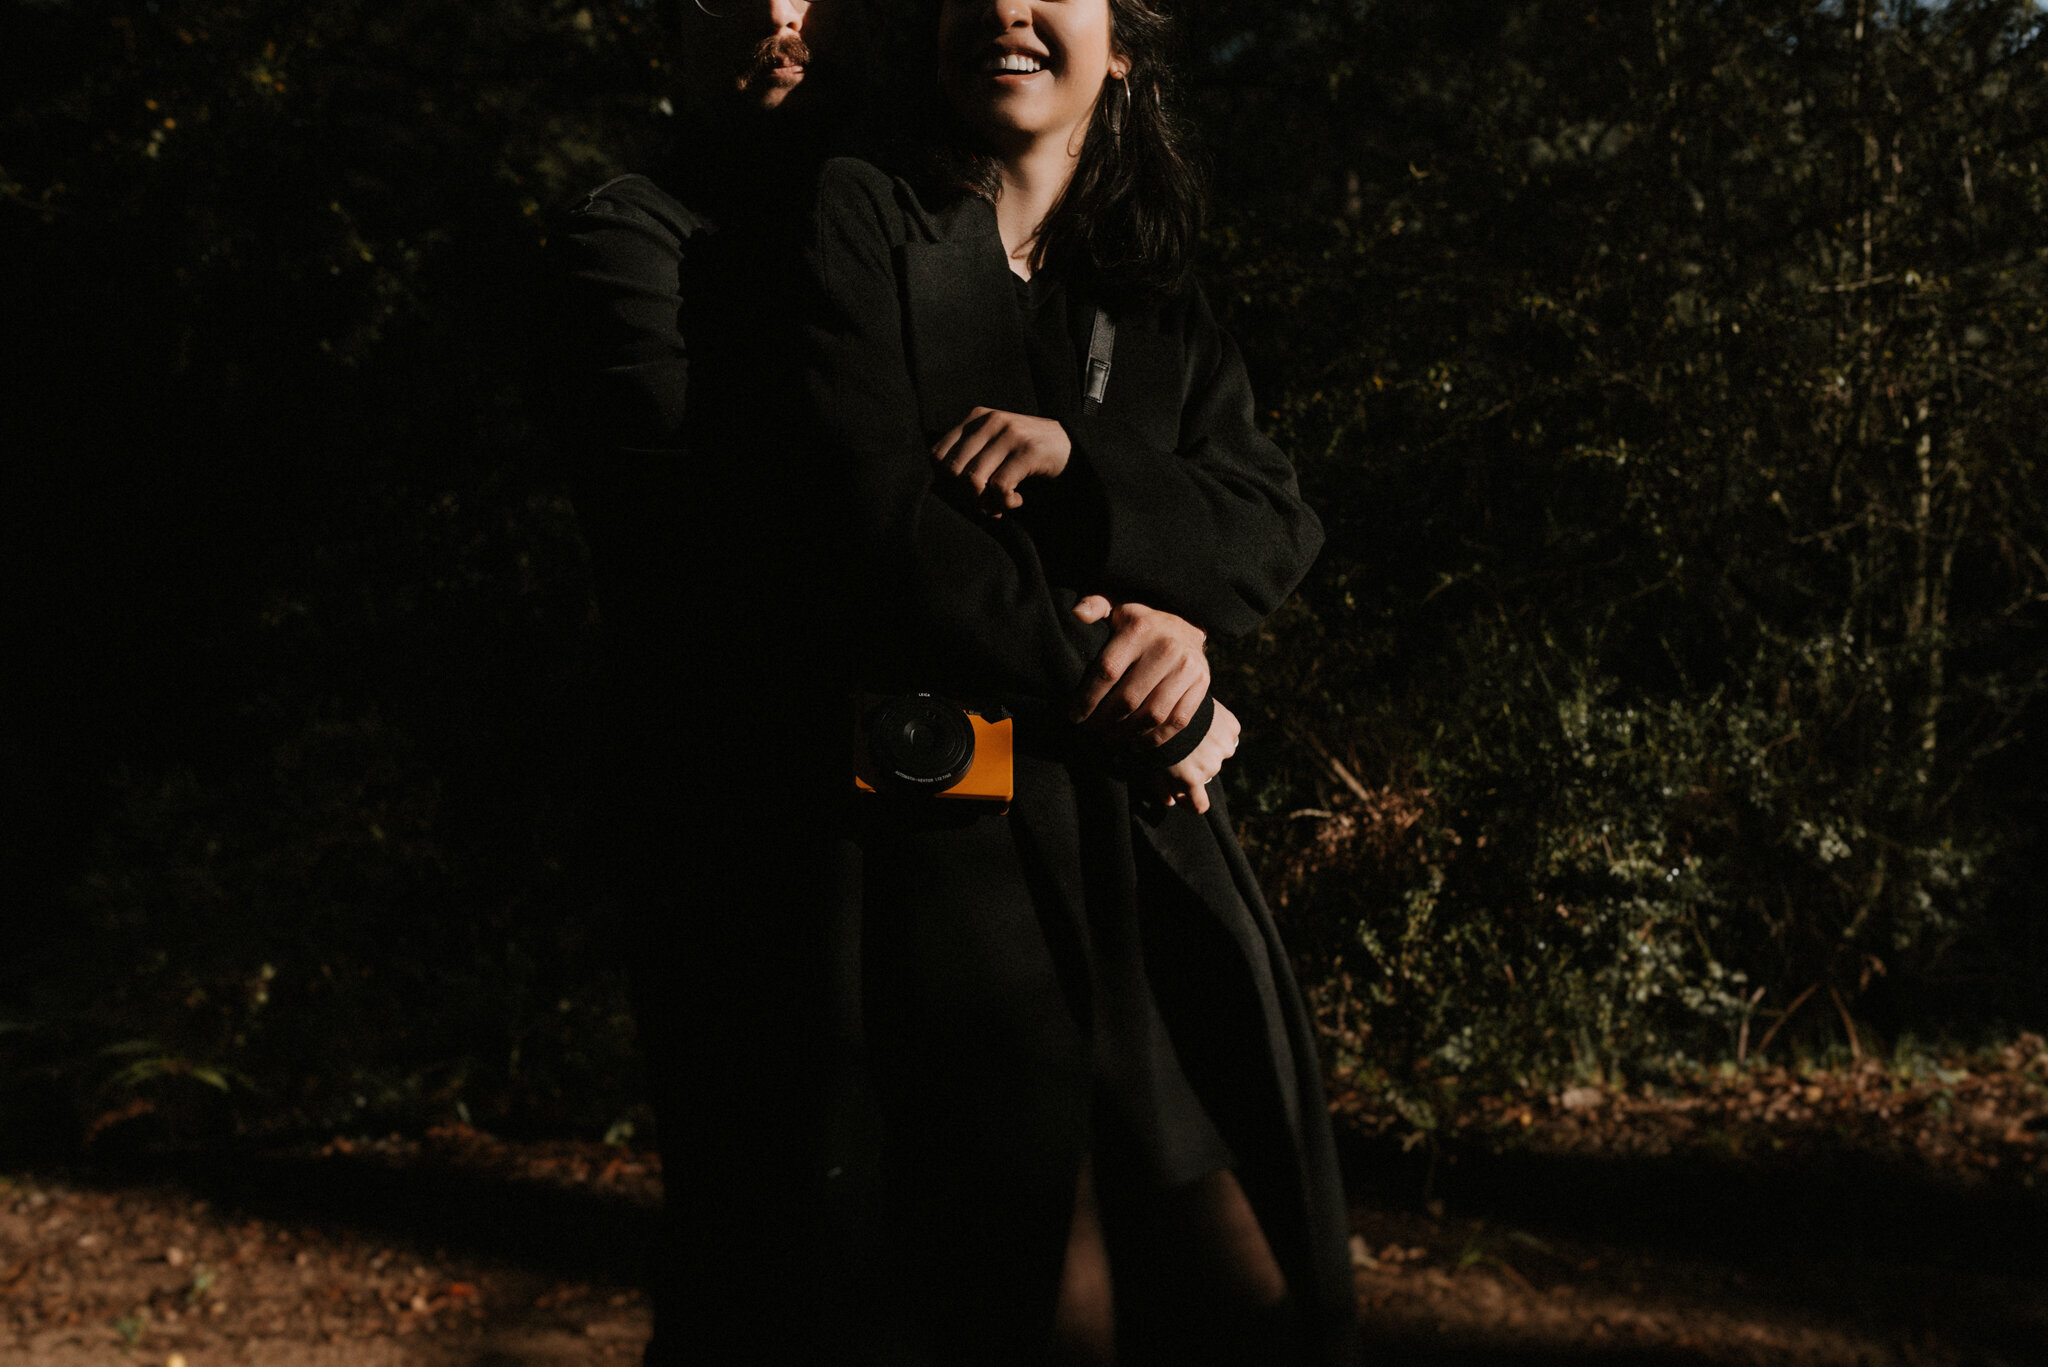 MEXICO COUPLE SESSION - IN THE WOODS - ANNA SAUZA PHOTOGRAPHY -31.jpg